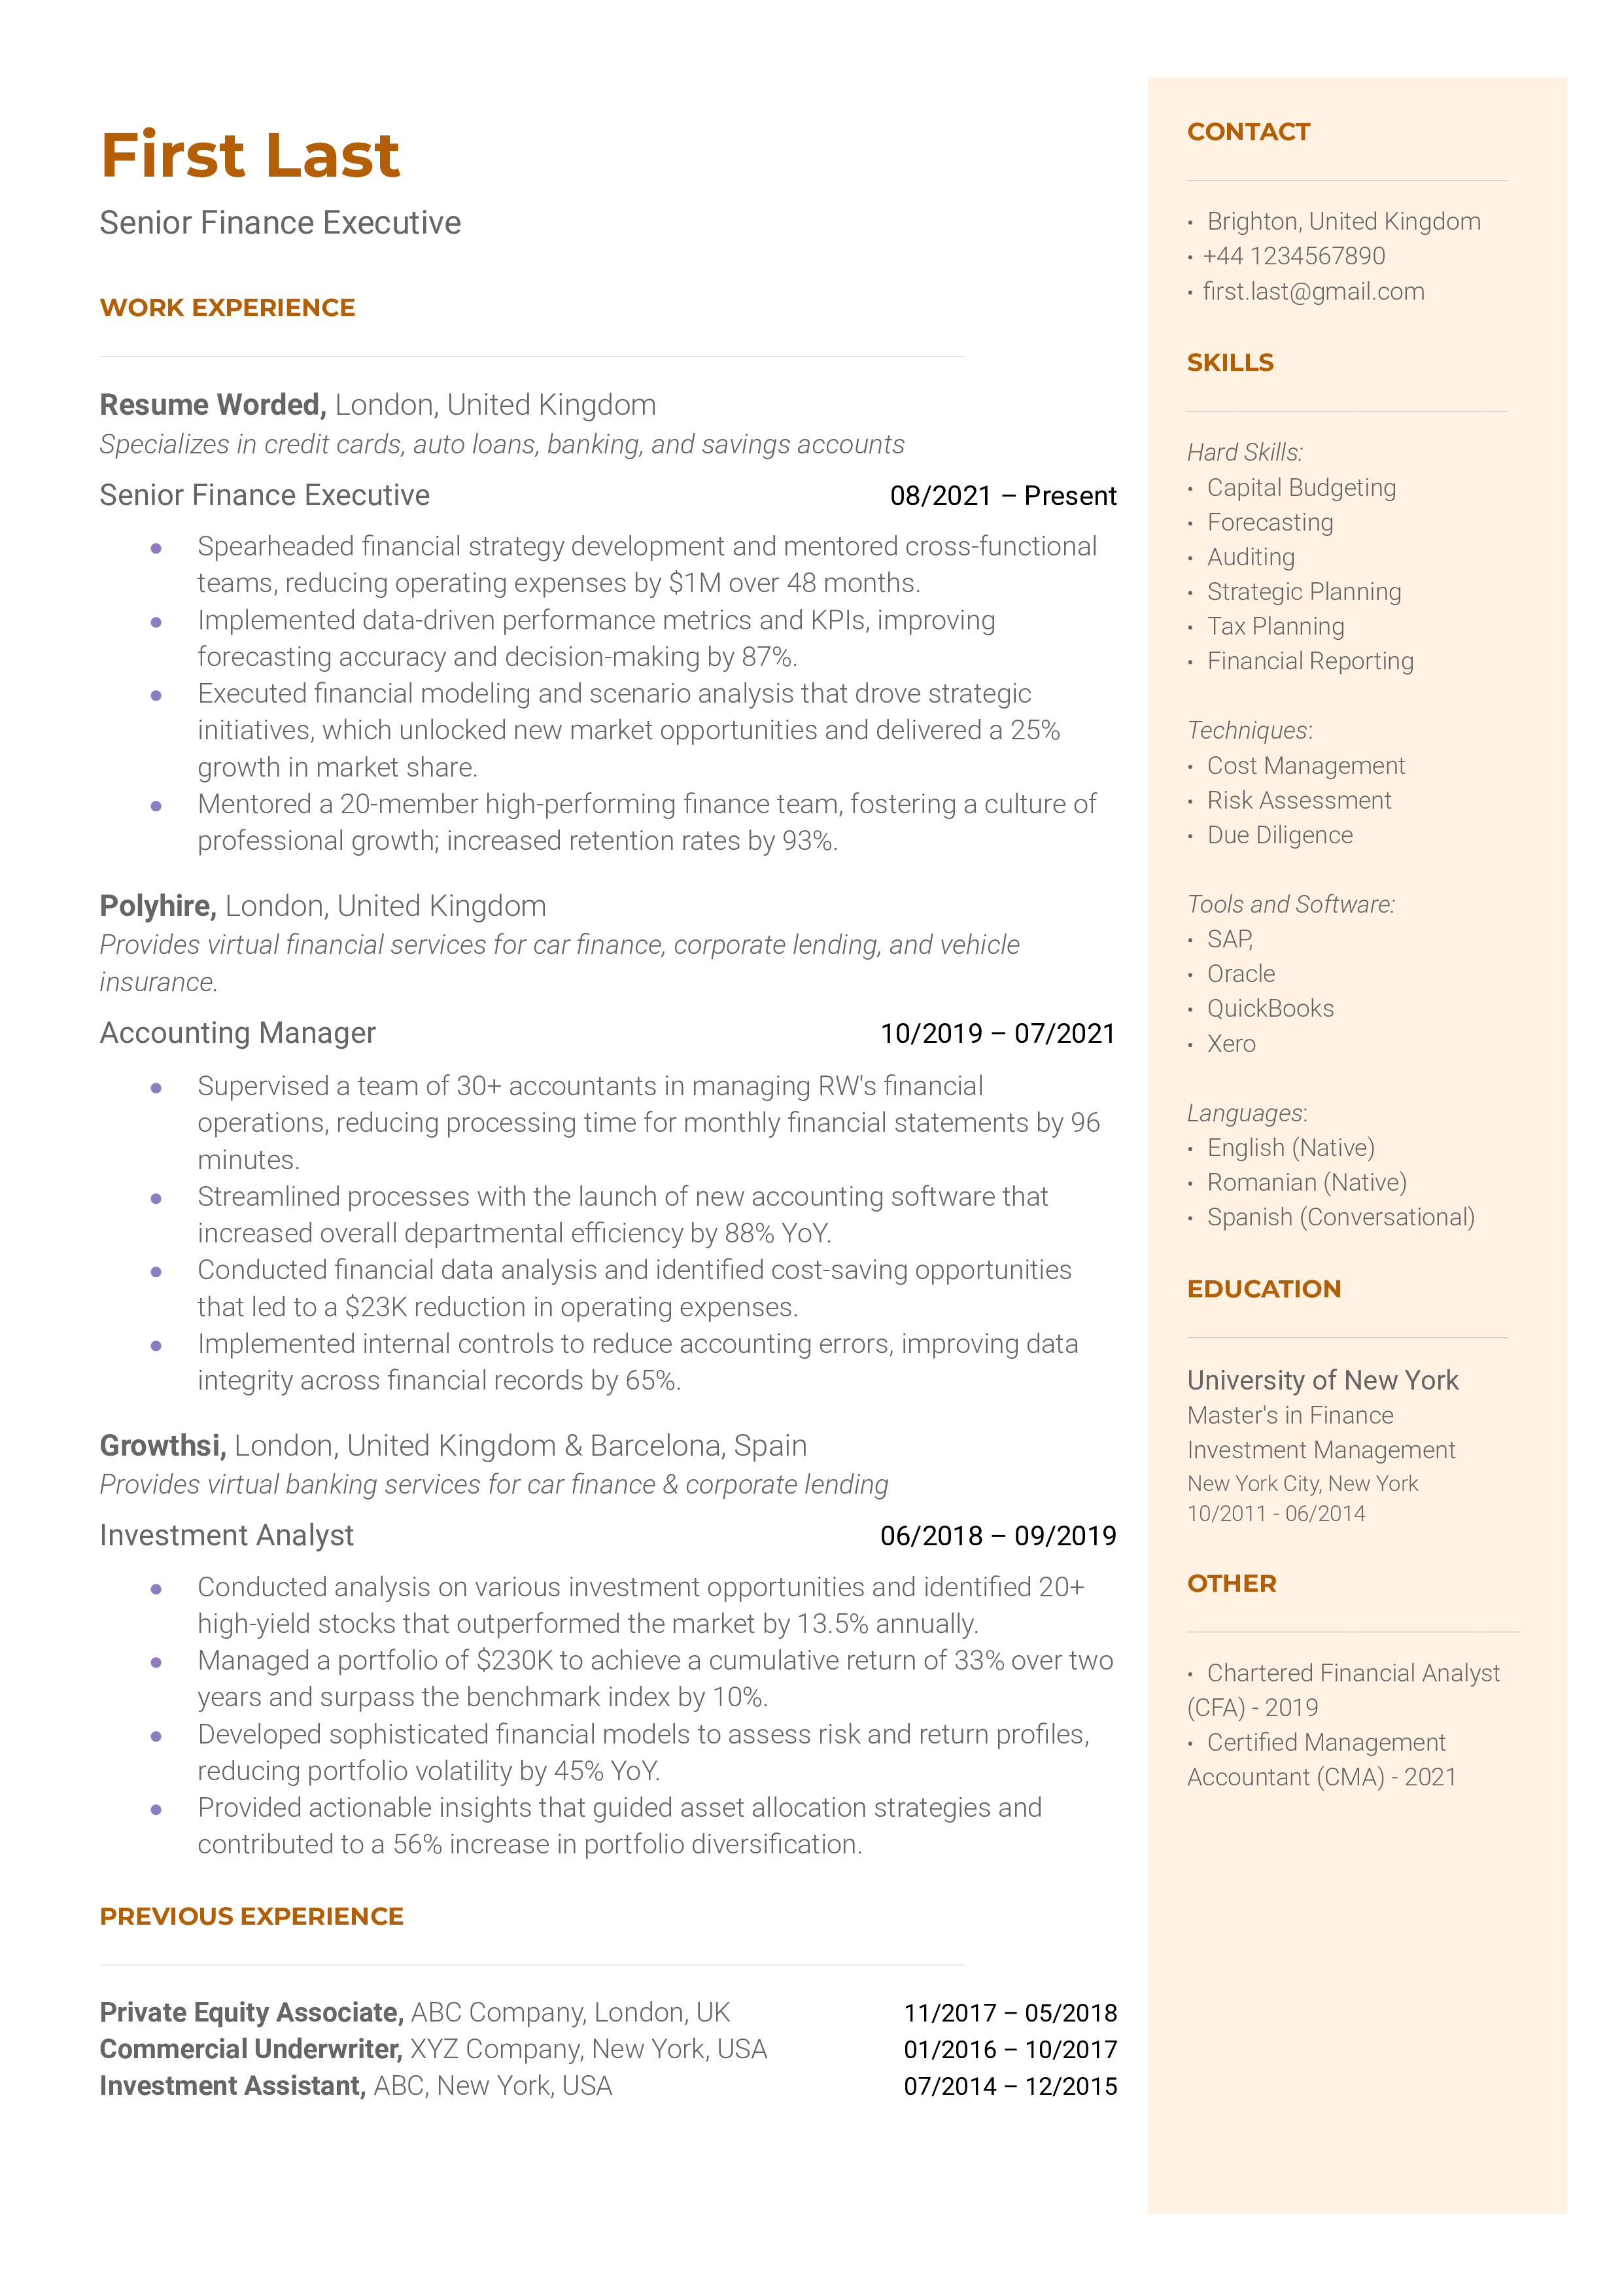 A well-structured CV for a Senior Finance Executive role.